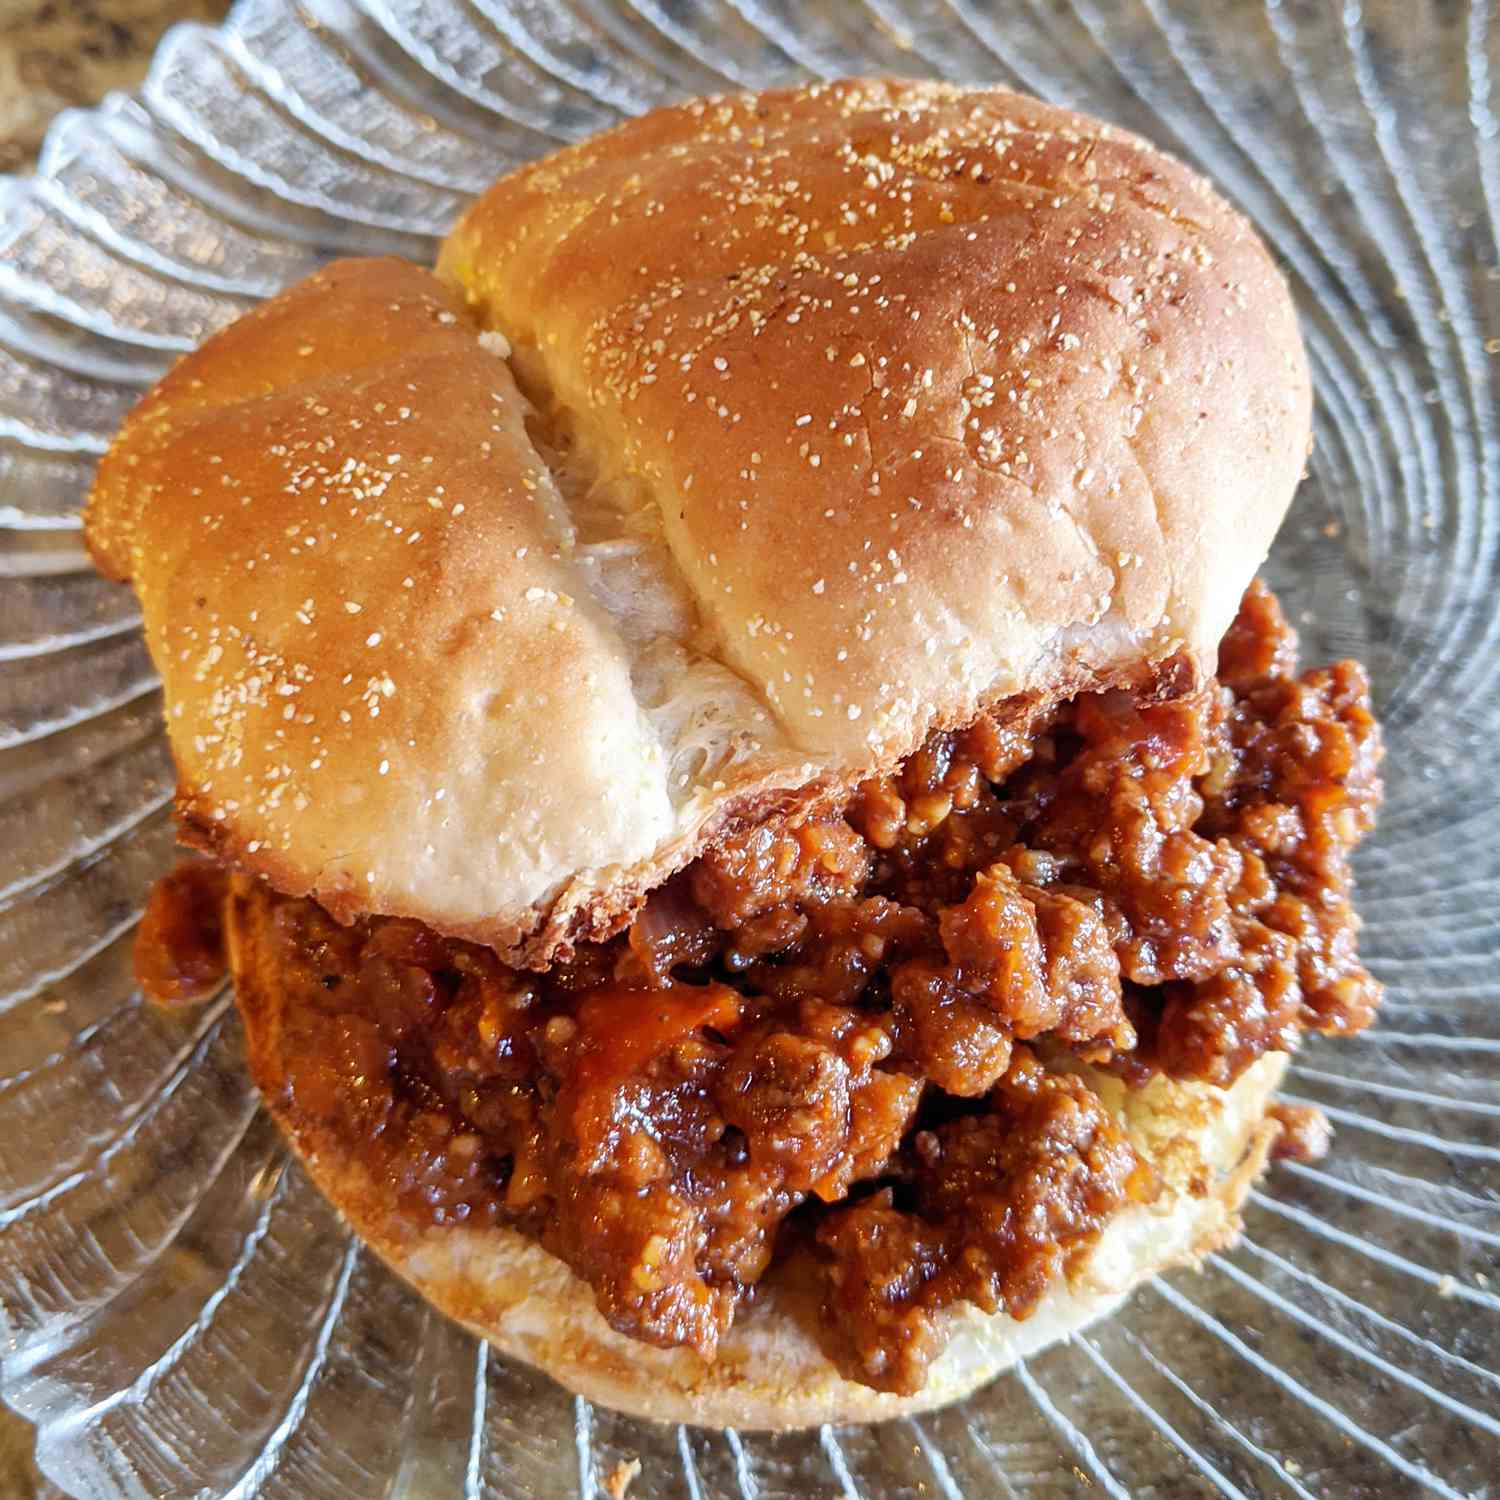 close up view of a sloppy joe in a bun, on a plate